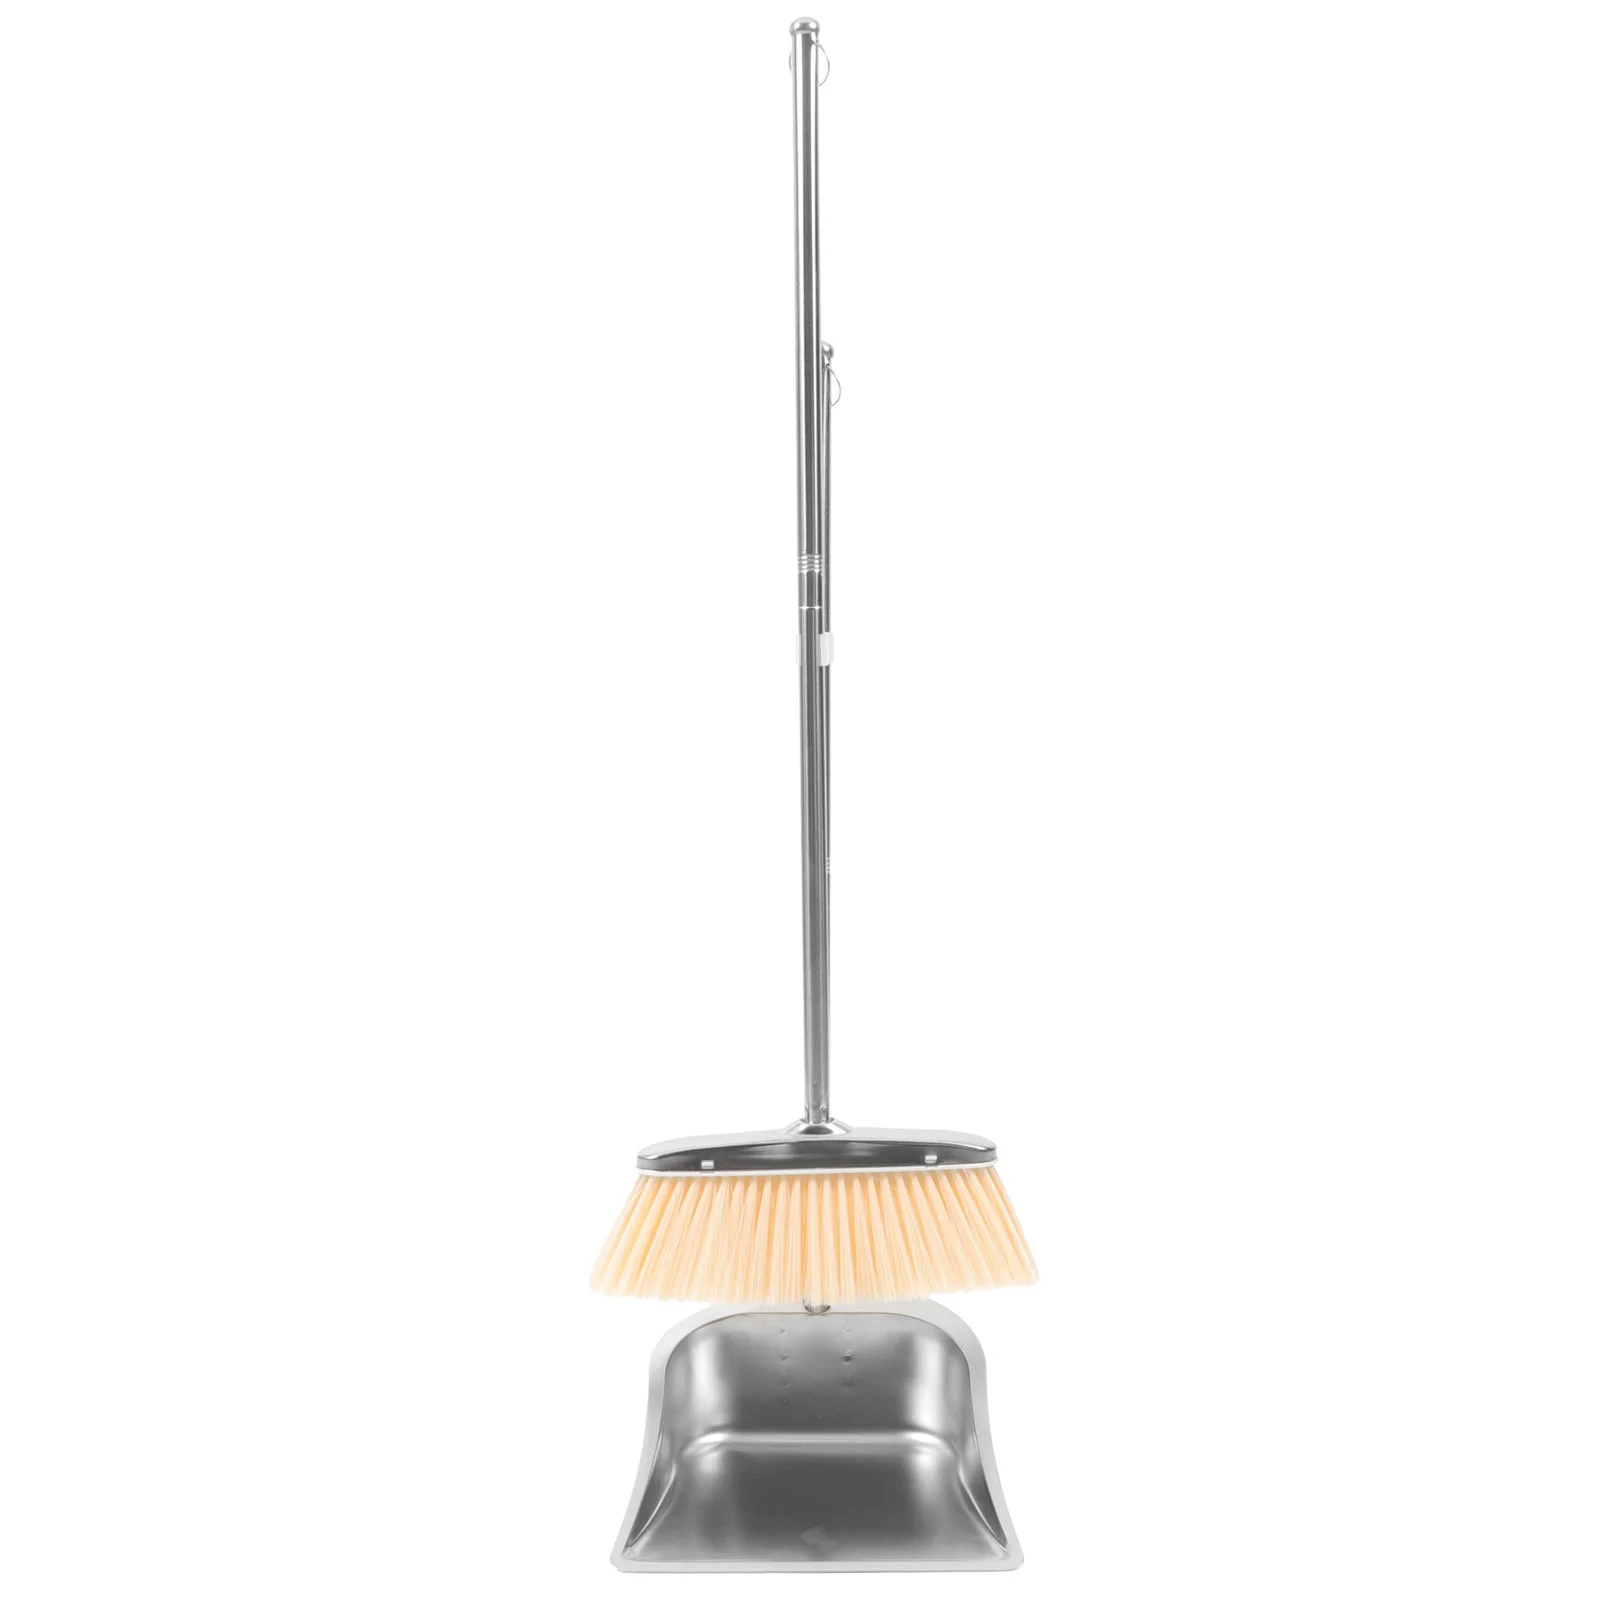 

Floorboard Cleaner Tool Home Cleaning Broom Wide Angle Dustpan Stainless Steel College Dorm Essentials